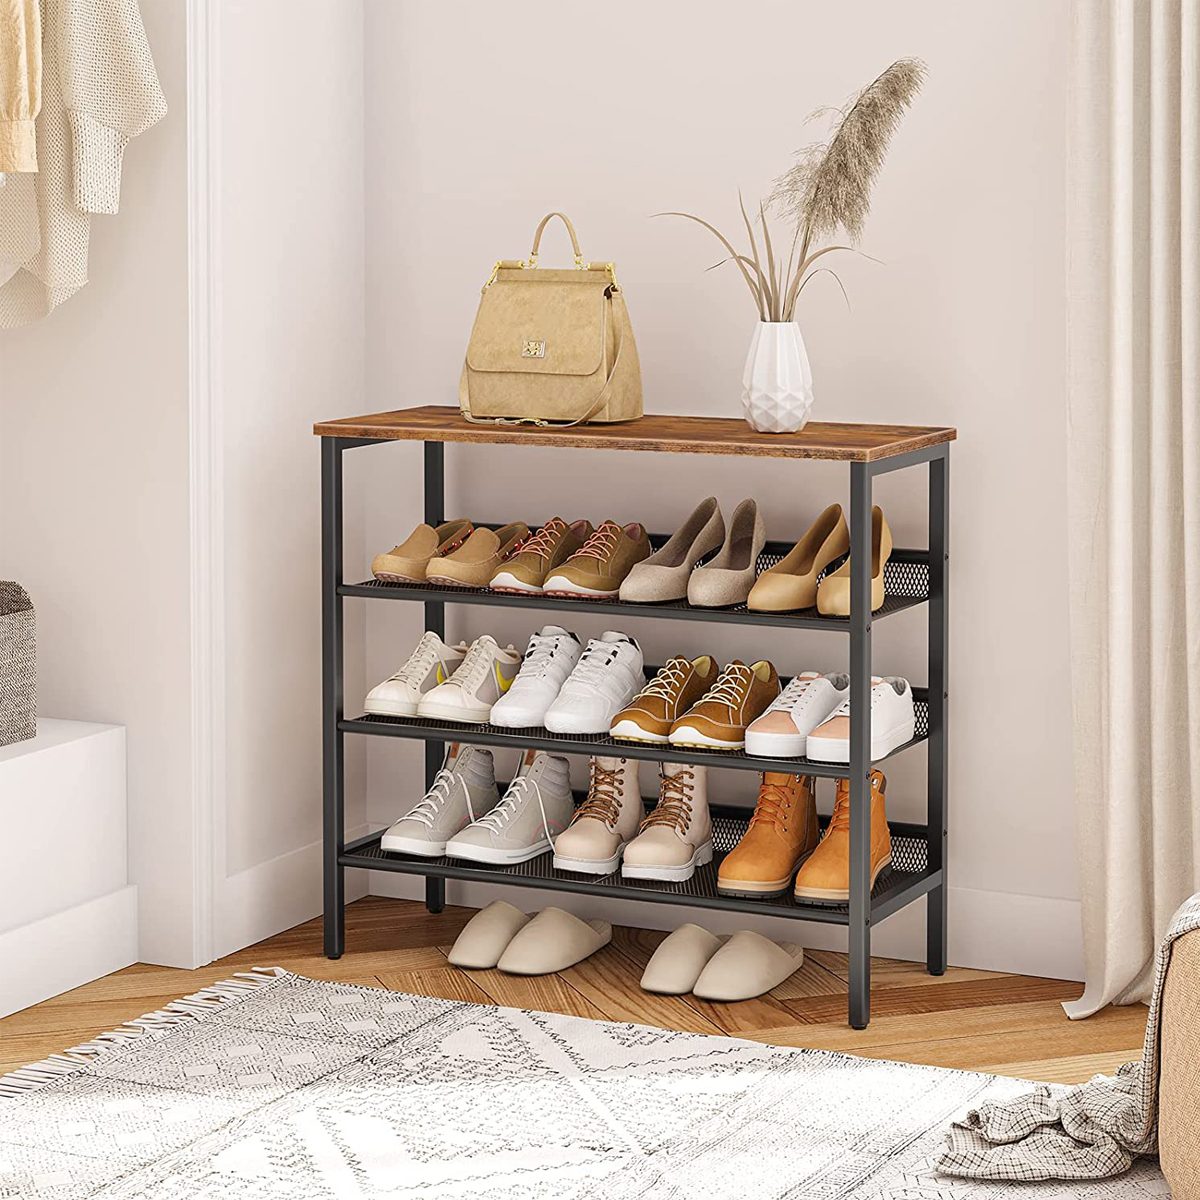 6 Best Closet Organizer Products to Keep Your Wardrobe Tidy